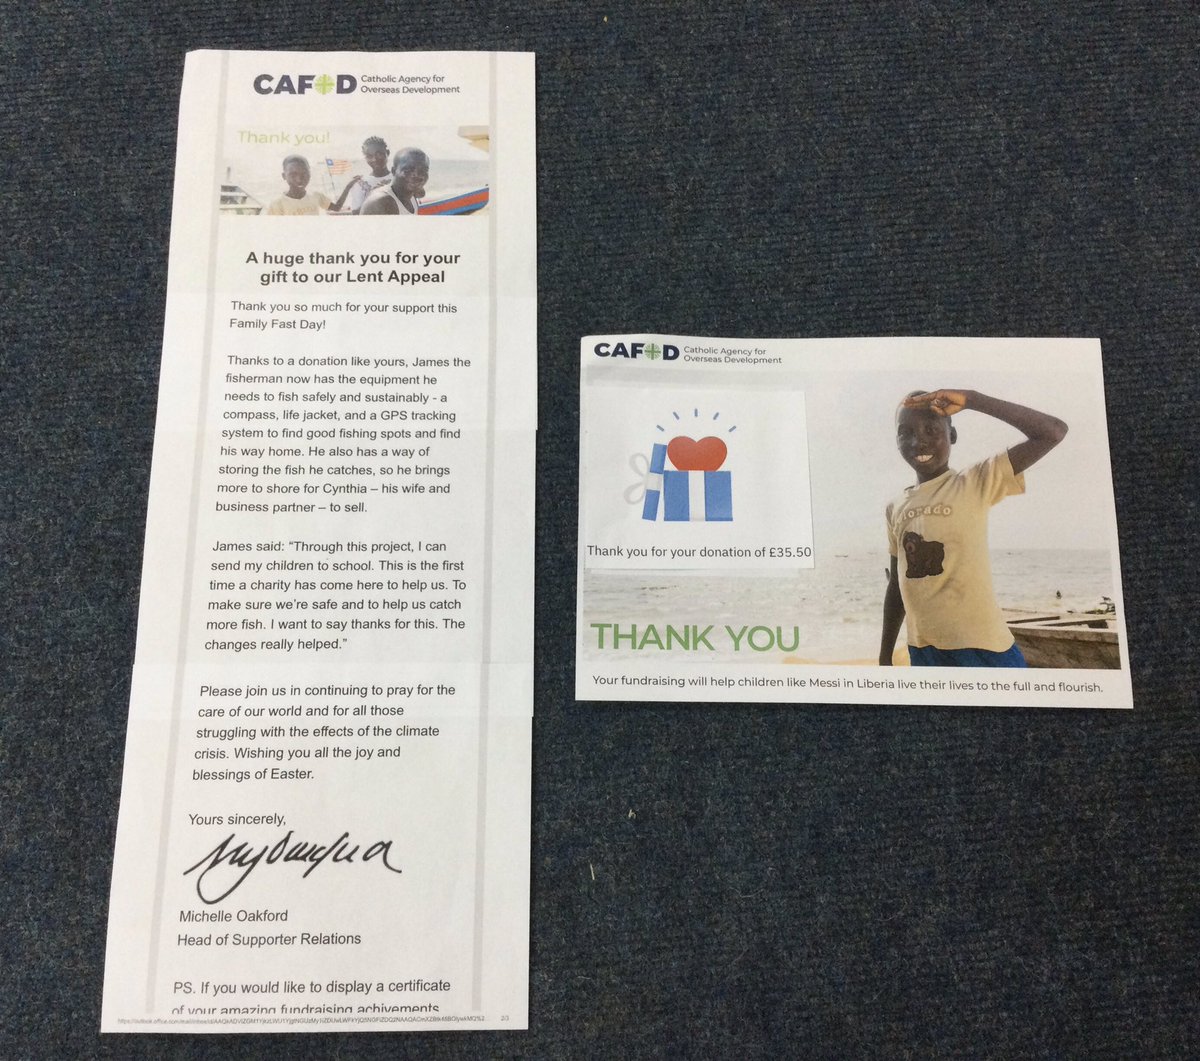 We’ve been collecting loose change & popping it into our CAFOD box on our Prayer table… small change really does make a big difference! Well done Reception & thank you Mrs C for sorting & sending our donations to CAFOD! 
#LoveLearnLive
@CAFODSchools 
@MissMcBrideSTM